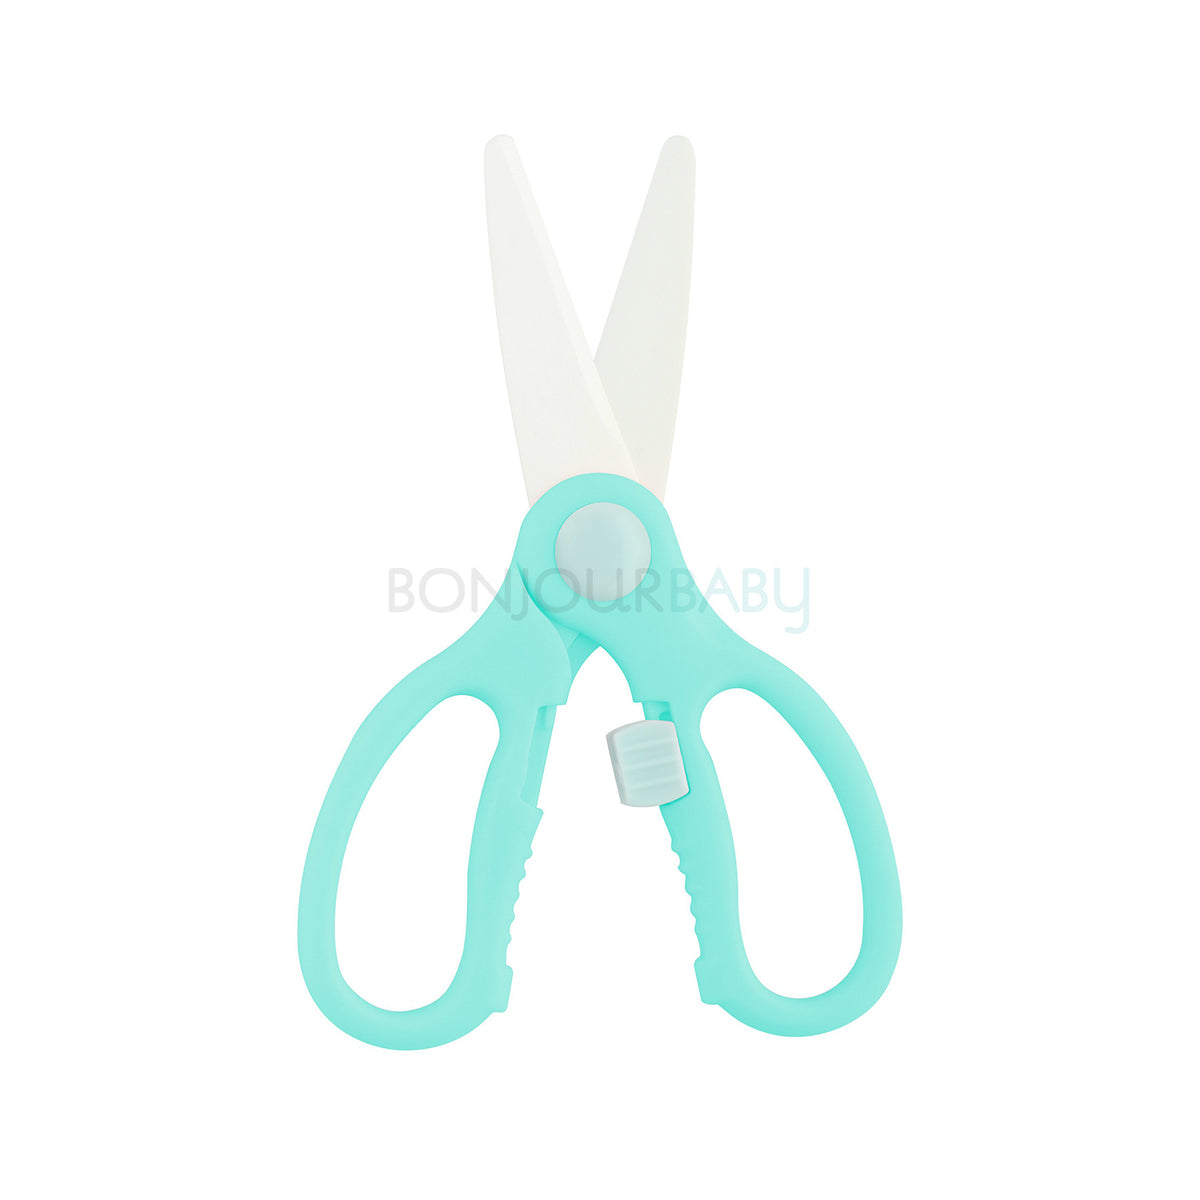 1 Pair Ceramic Baby Scissors Food Grade Bpa Free Portable Infant Toddler  Supplement Scissors With Protective Blade Cover (blue)